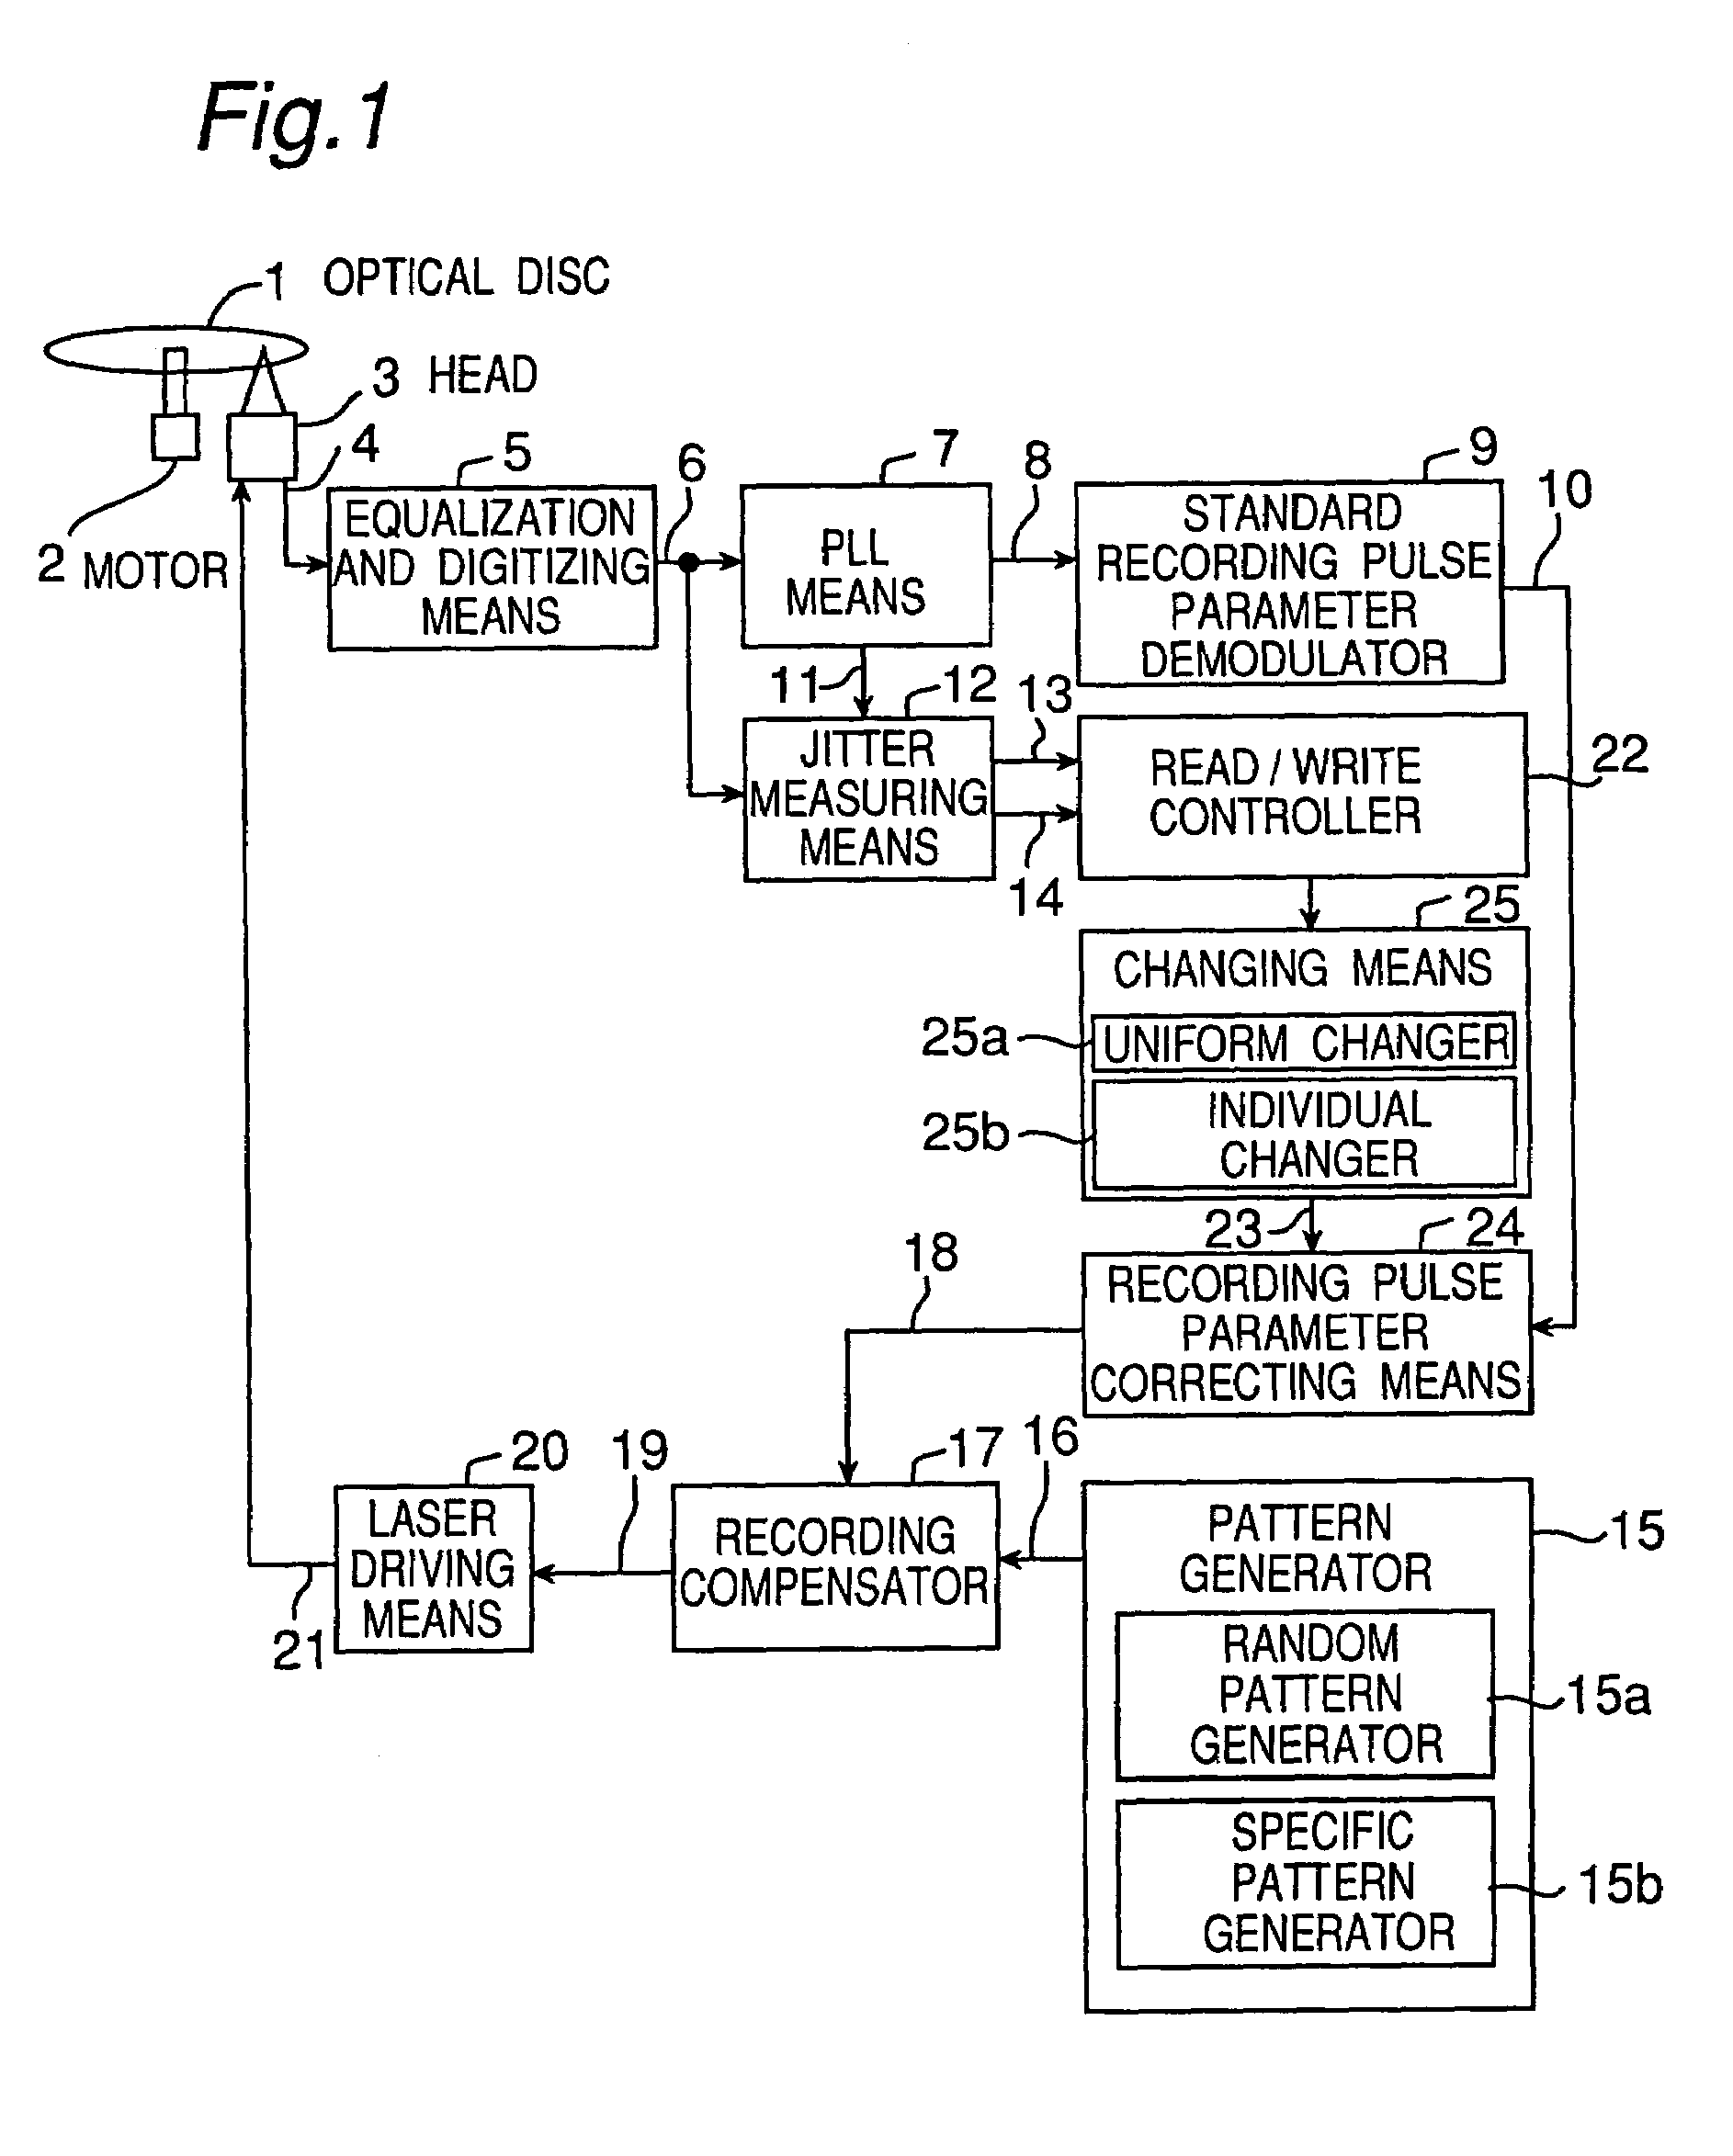 Method and apparatus for determining recording pulse parameters for an optical disc